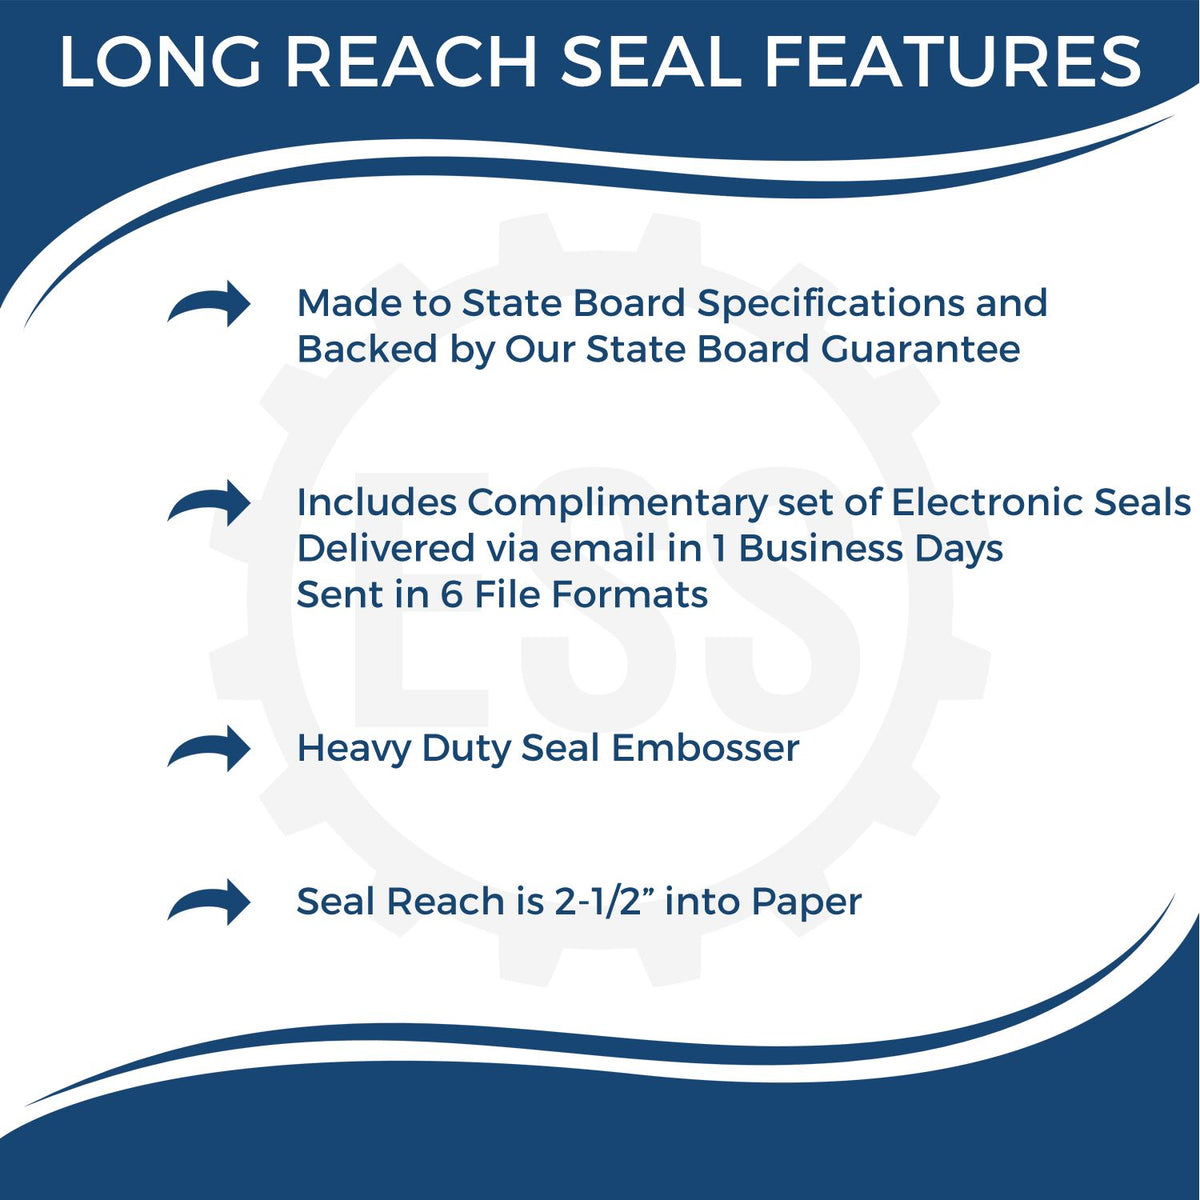 A picture of an infographic highlighting the selling points for the Long Reach Utah PE Seal